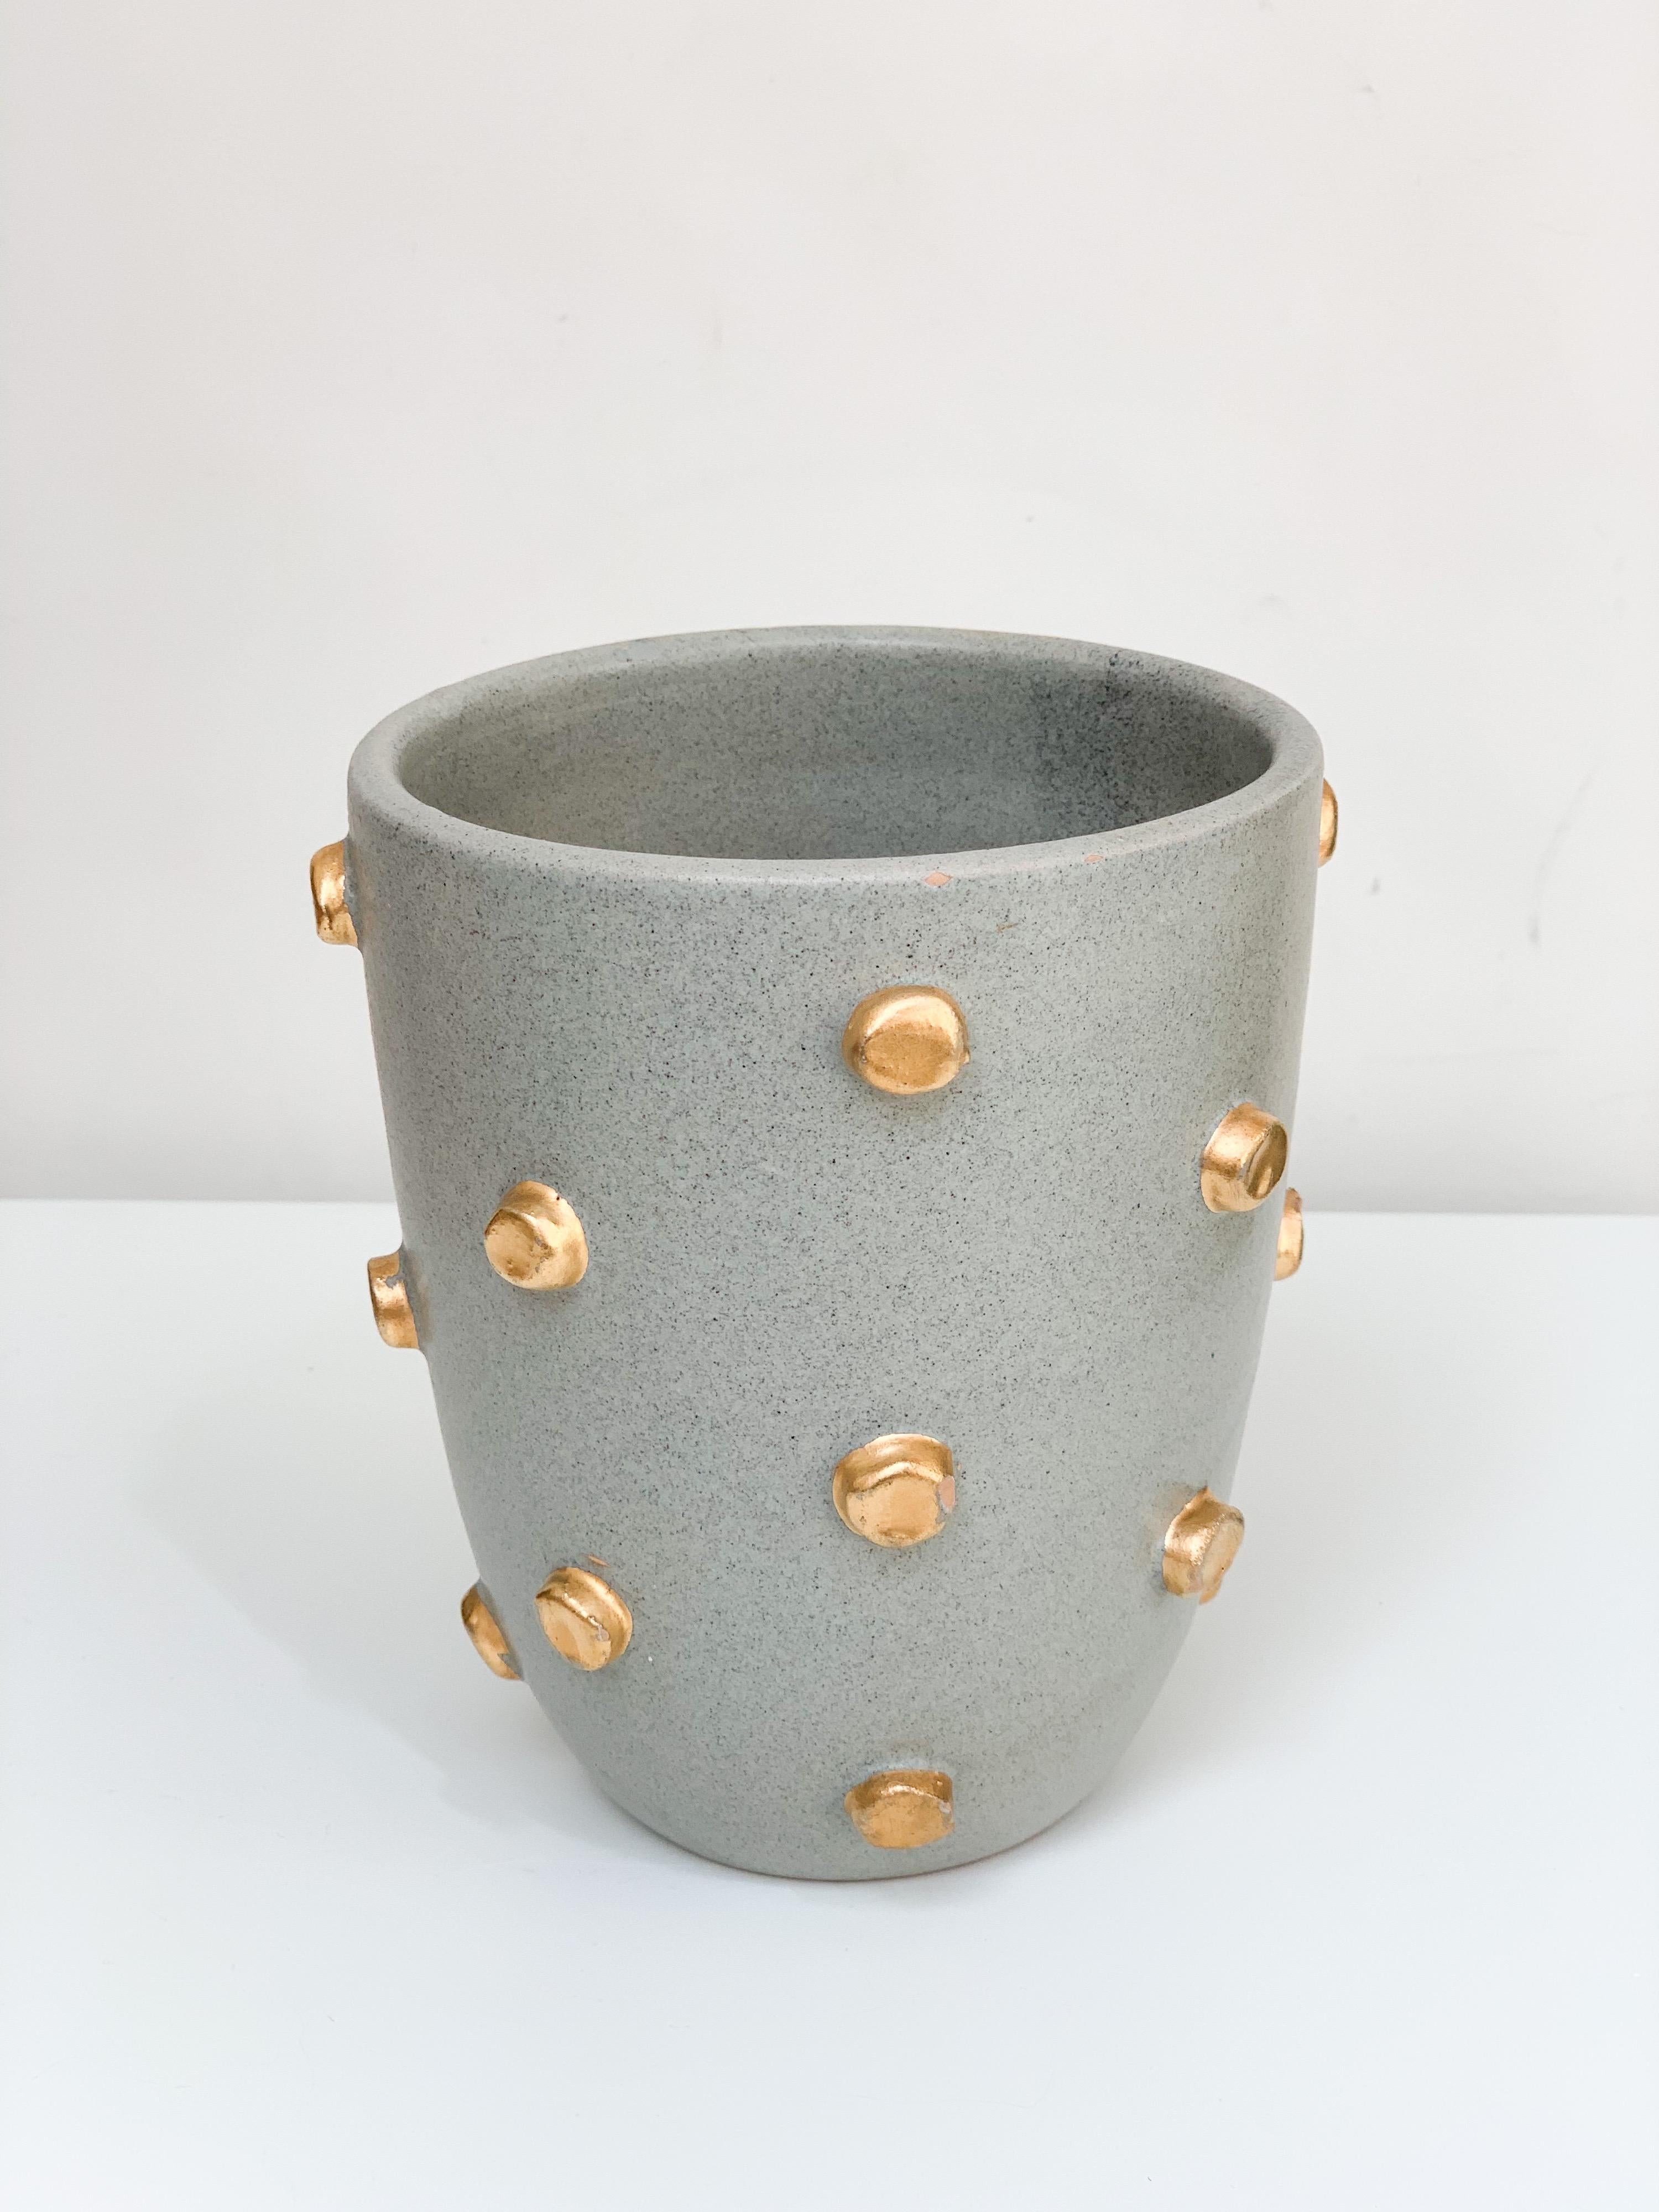 Mid-20th Century Bitossi Vase, Ceramic, Gray and Gold Hobnails, Signed